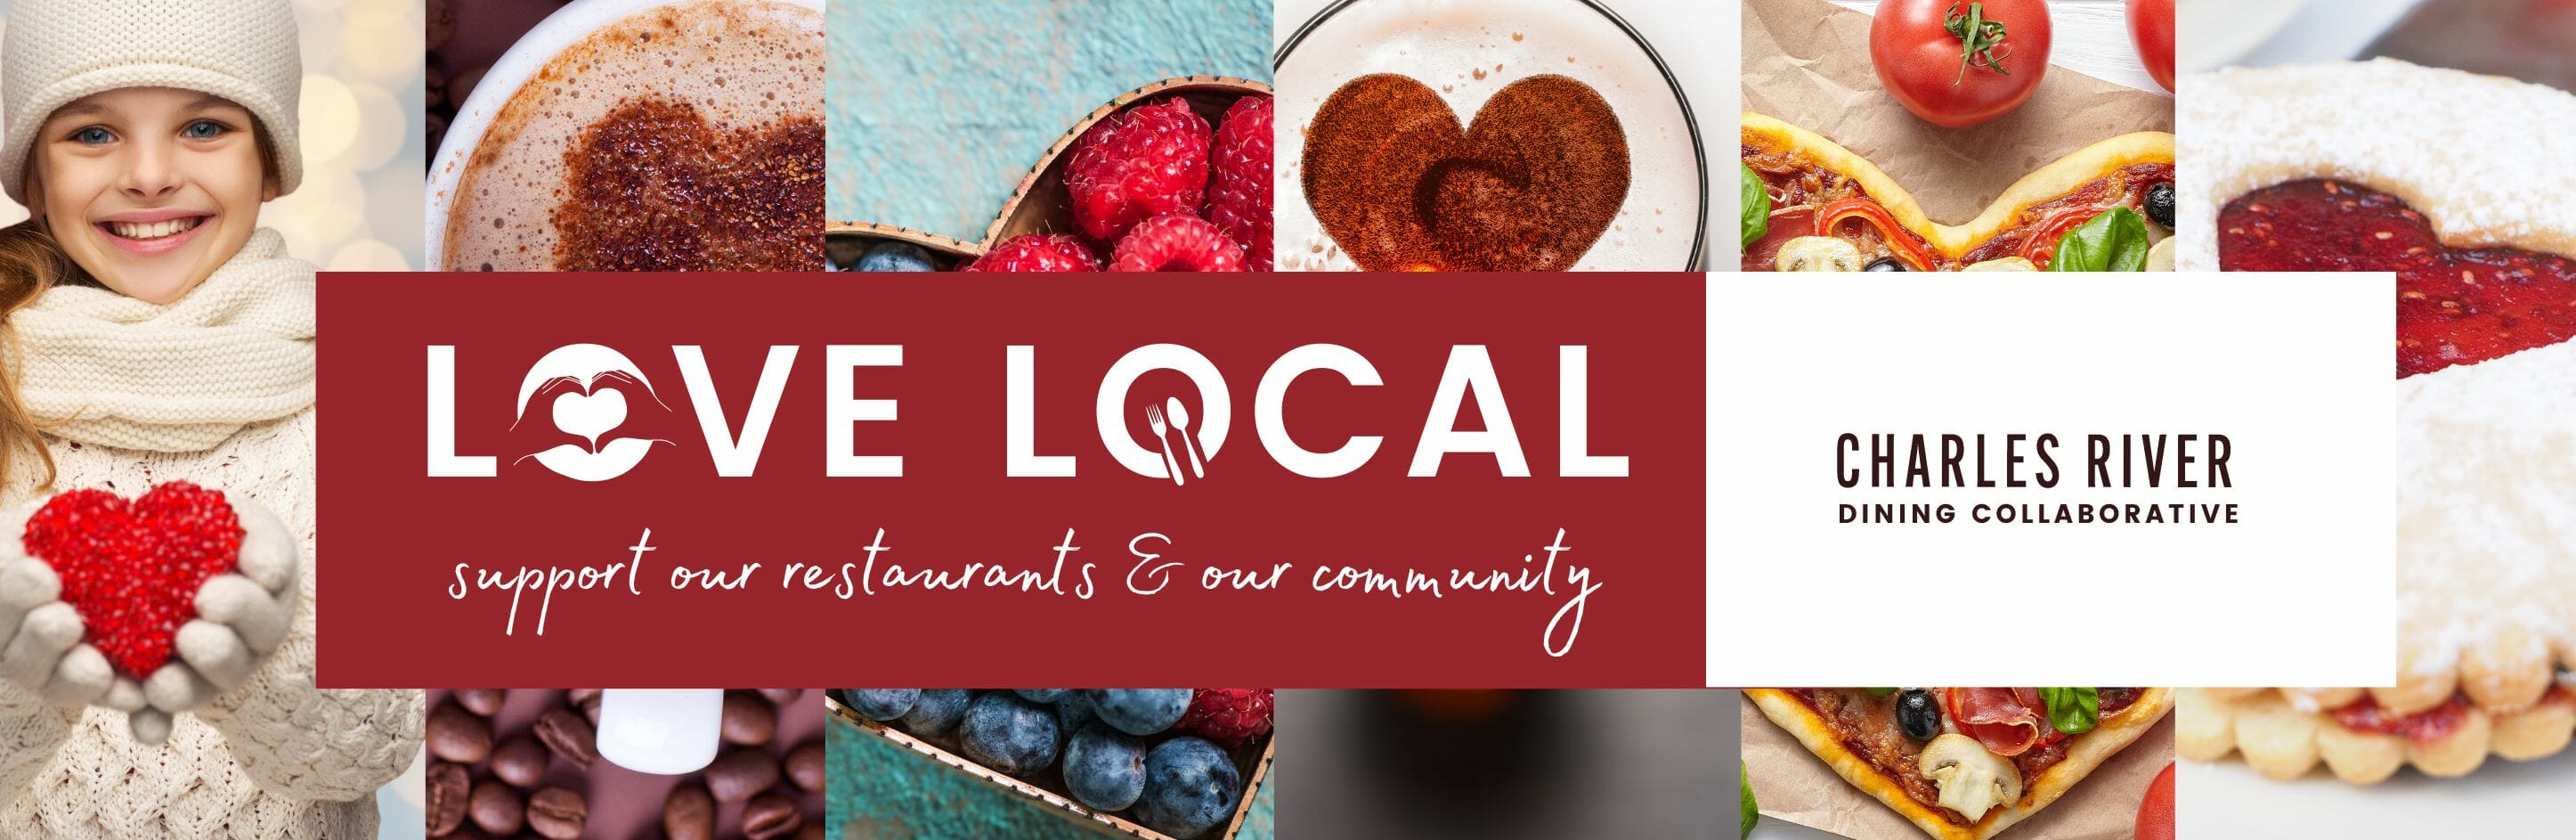 Love Local - Support Our Restaurants and Our Community